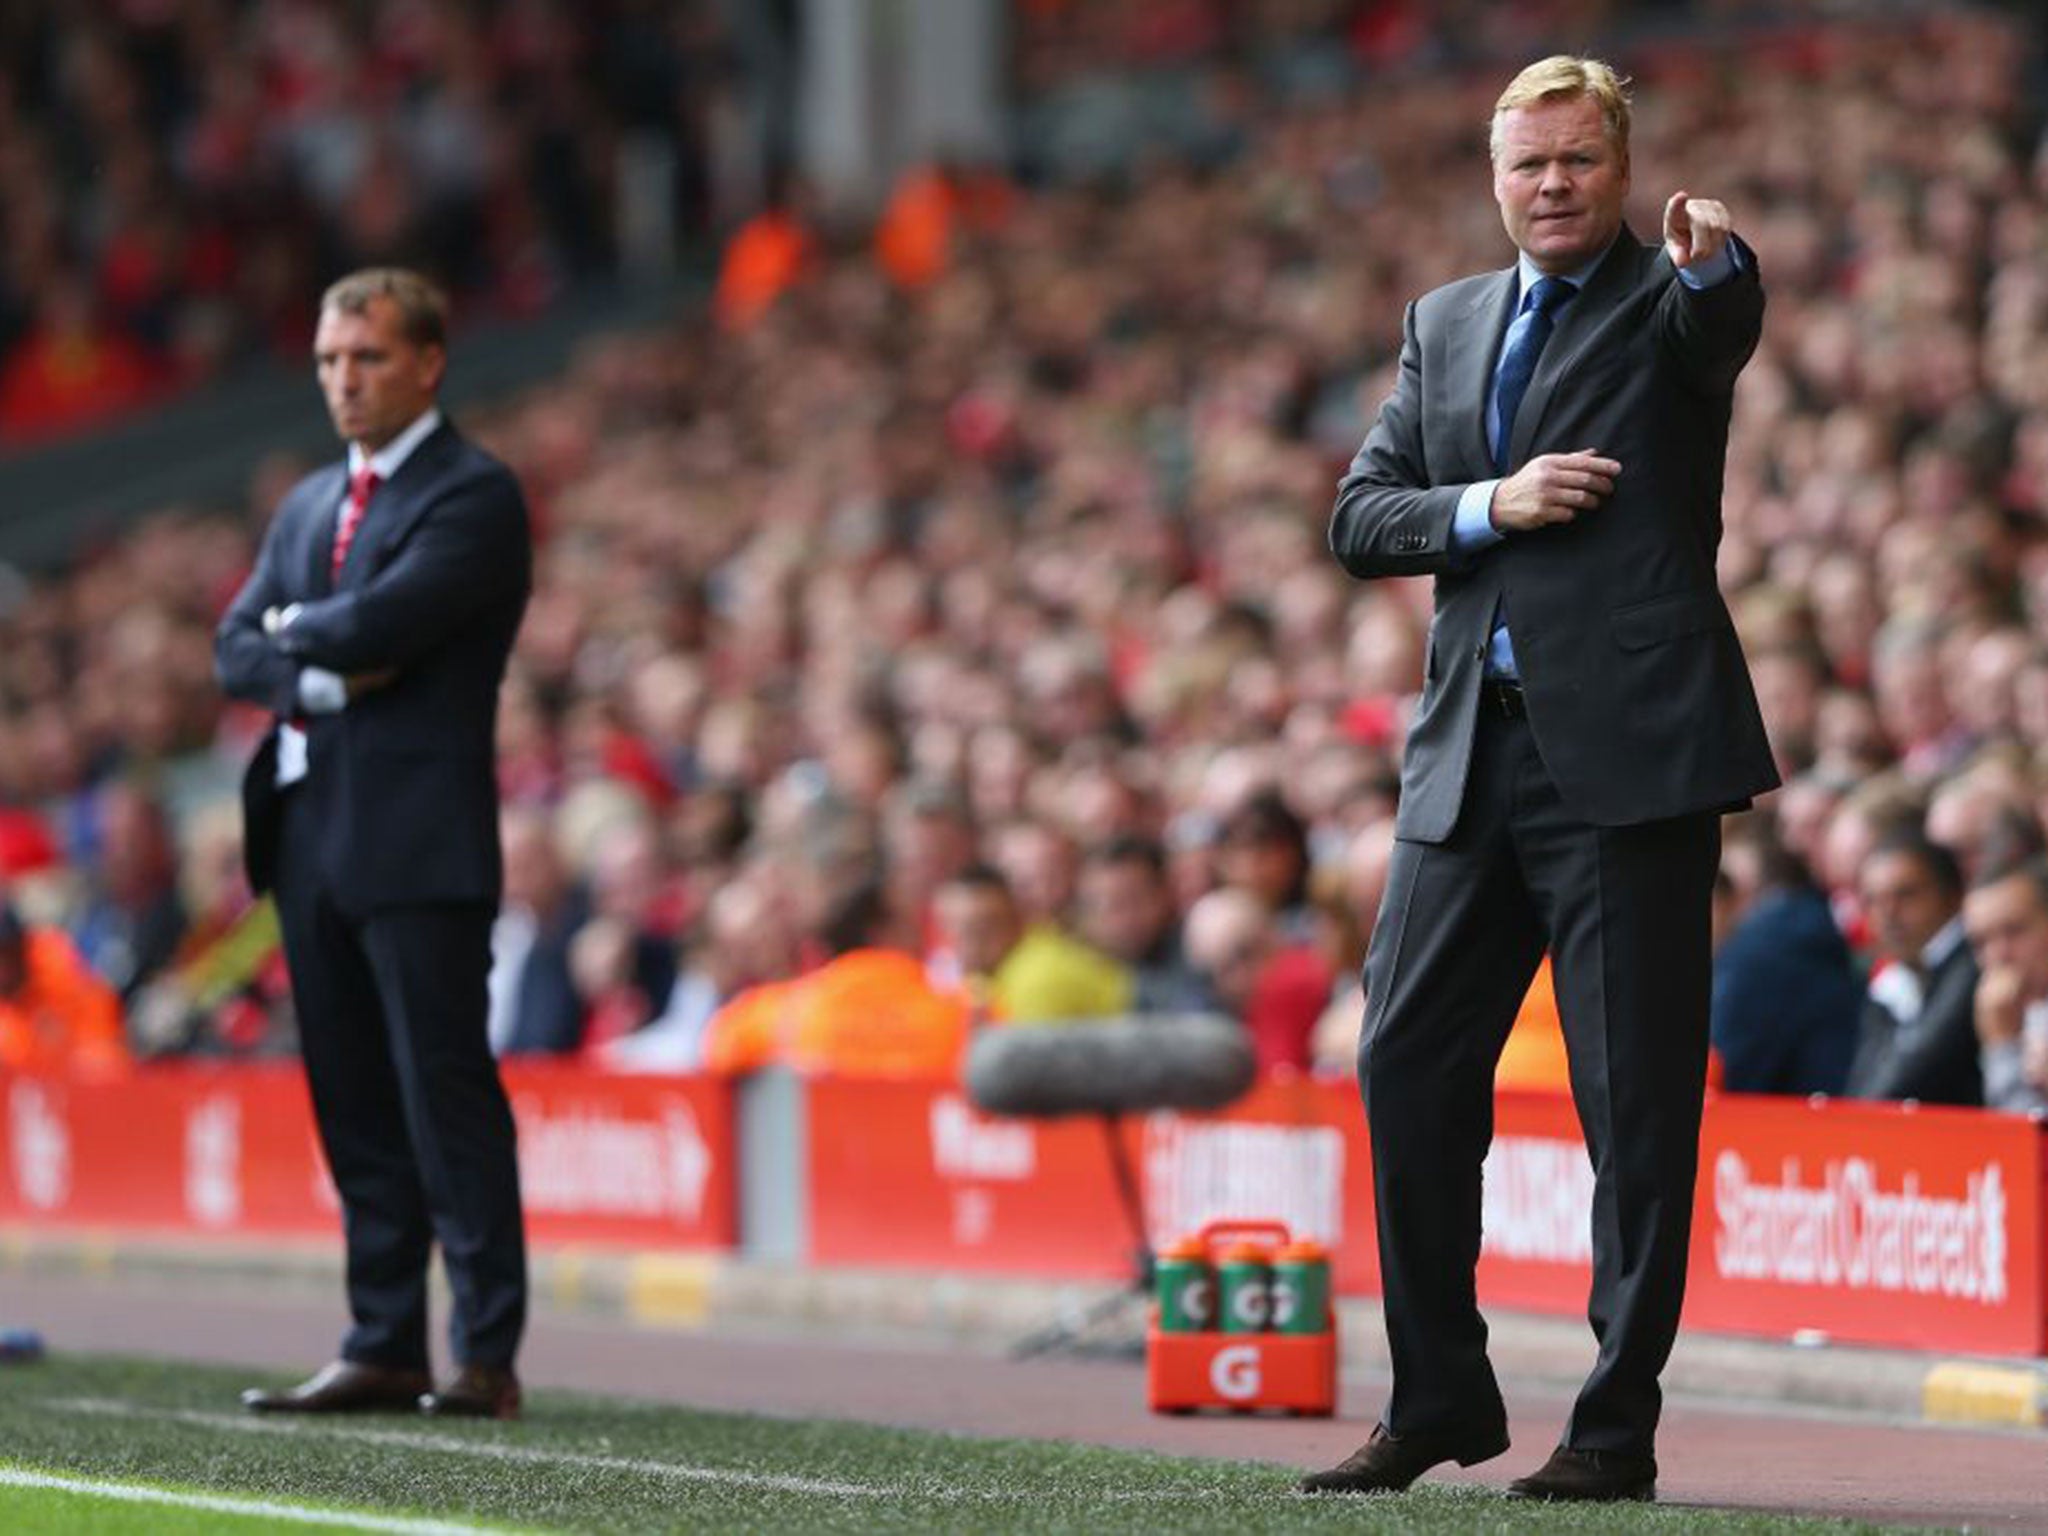 Southampton’s coherent display in defeat at Anfield suggested that Ronald Koeman knows how to build a team